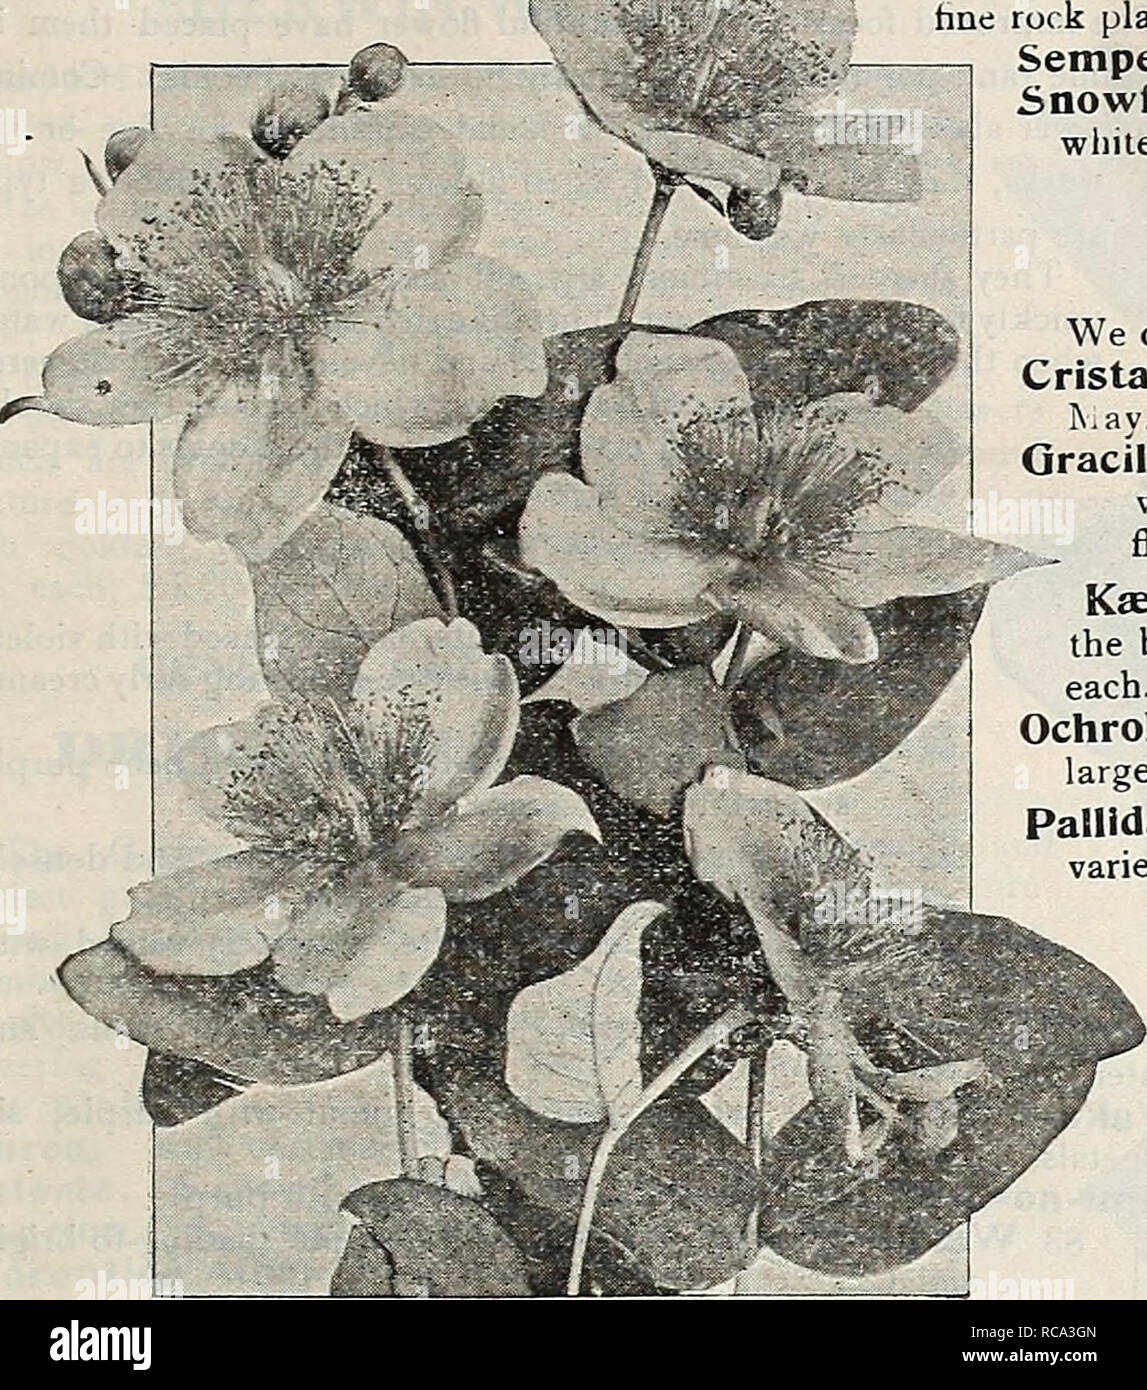 . Dreer's garden book 1919. Seeds Catalogs; Nursery stock Catalogs; Gardening Equipment and supplies Catalogs; Flowers Seeds Catalogs; Vegetables Seeds Catalogs; Fruit Seeds Catalogs. rvfi r-. 185 IBERIS (Hardy Candytuft) Most desirable dwarf plants (8 to 10 inches) with evergreen foliage, which is completely hidden with den^e heads of flowers early in the spring. Little (Jem. Very dwarf and covered with a sheet of white, a particularly hne rock plant. Sempervirens. Innumerable flat heads of pure white flowers. Snowflake. A grand variety,&quot; having exceptionally large and pure white flowers Stock Photo